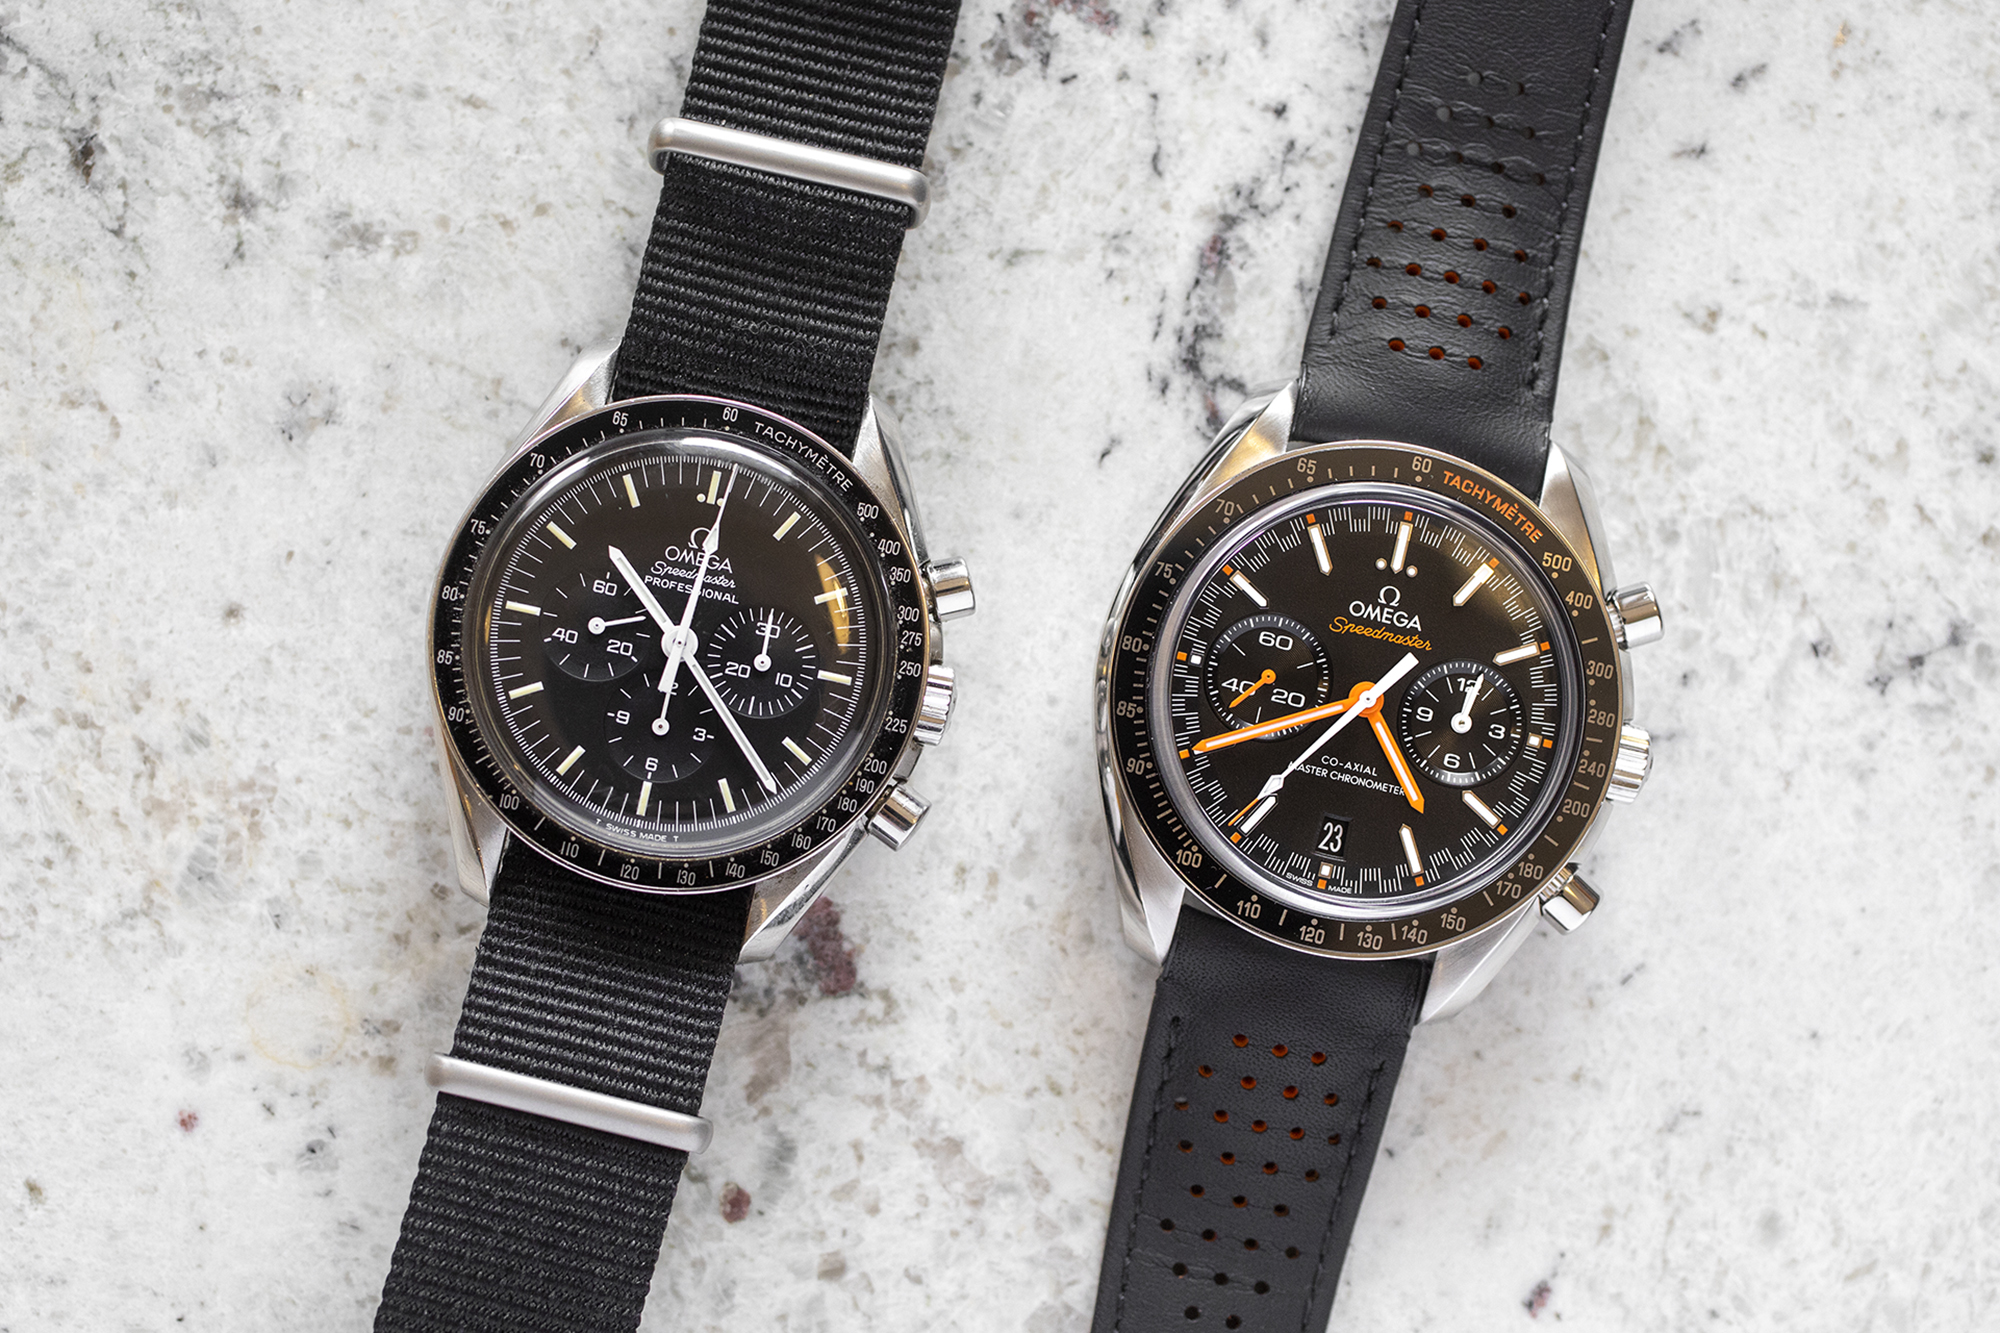 omega aviation watches